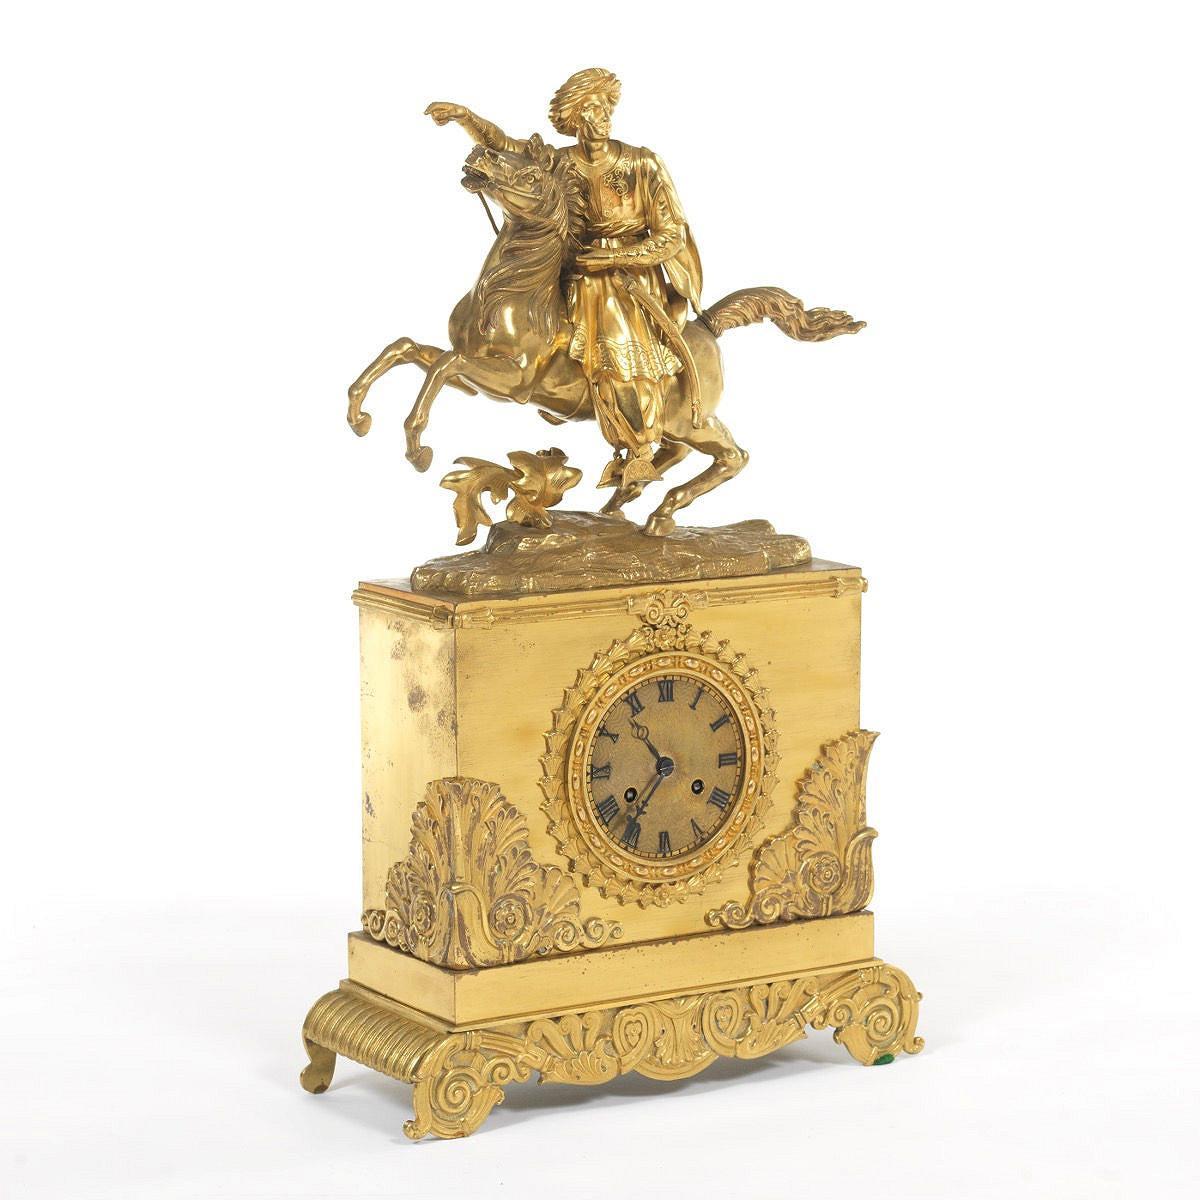 Antique (19th century) gilt bronze and metal mantel clock retailed by Tiffany & Co. depicting a Greek  warrior on horseback.  22 3/4 by 12 1/2 by 5 inches.  Rear marked TIFFANY & CO.  With original pendulum and key.